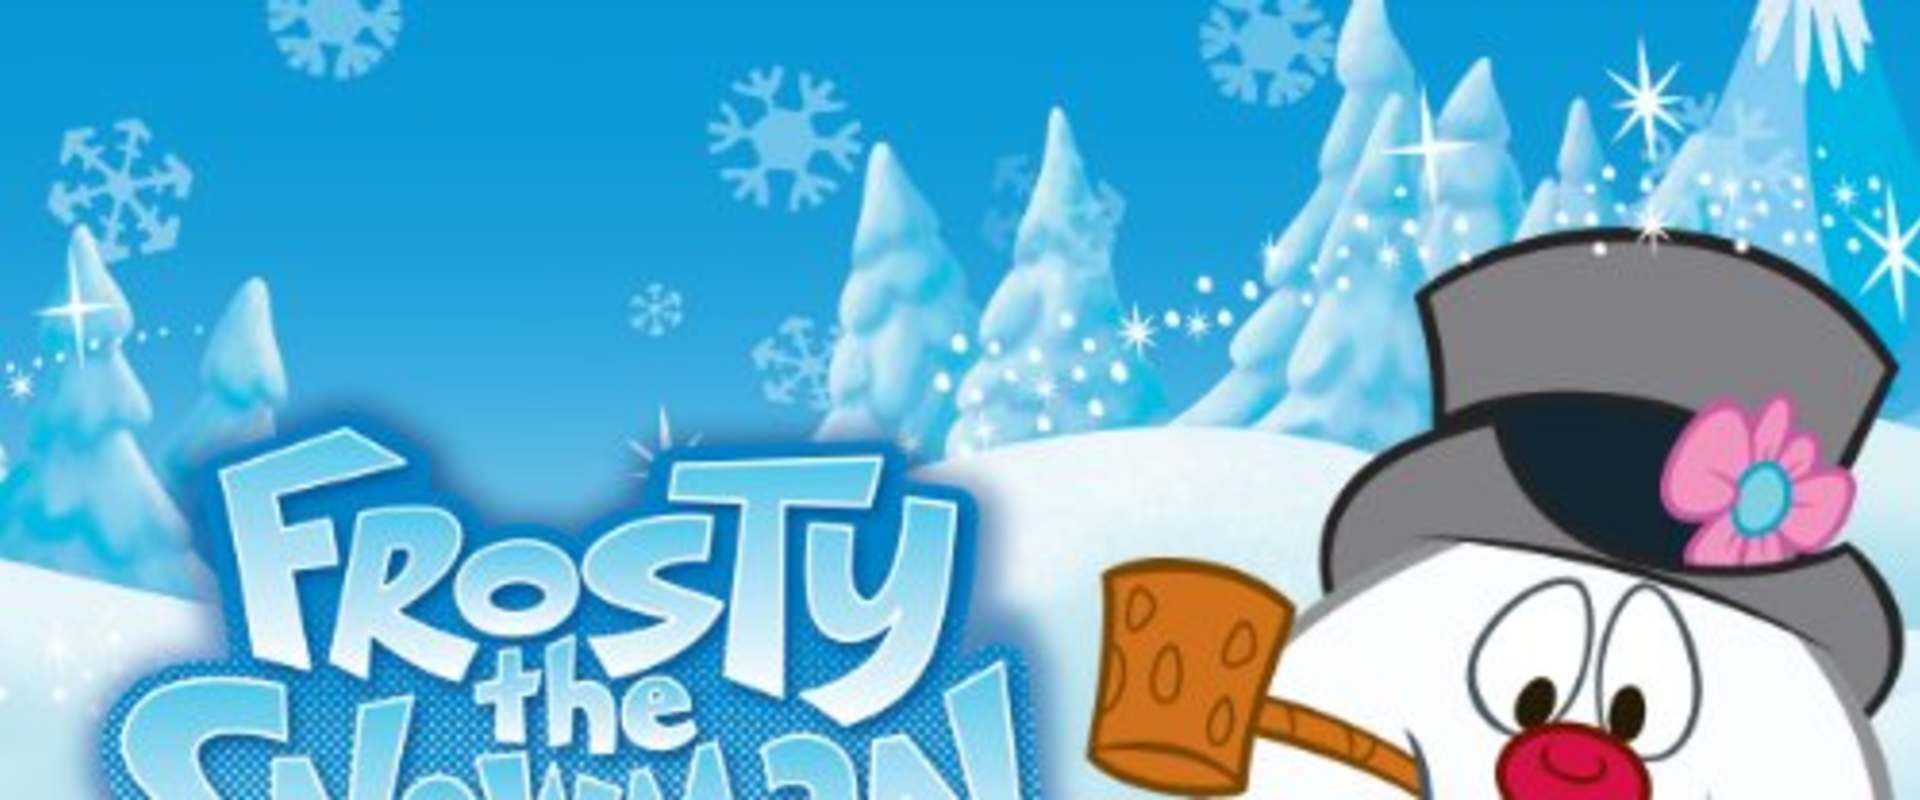 Frosty the Snowman background 2